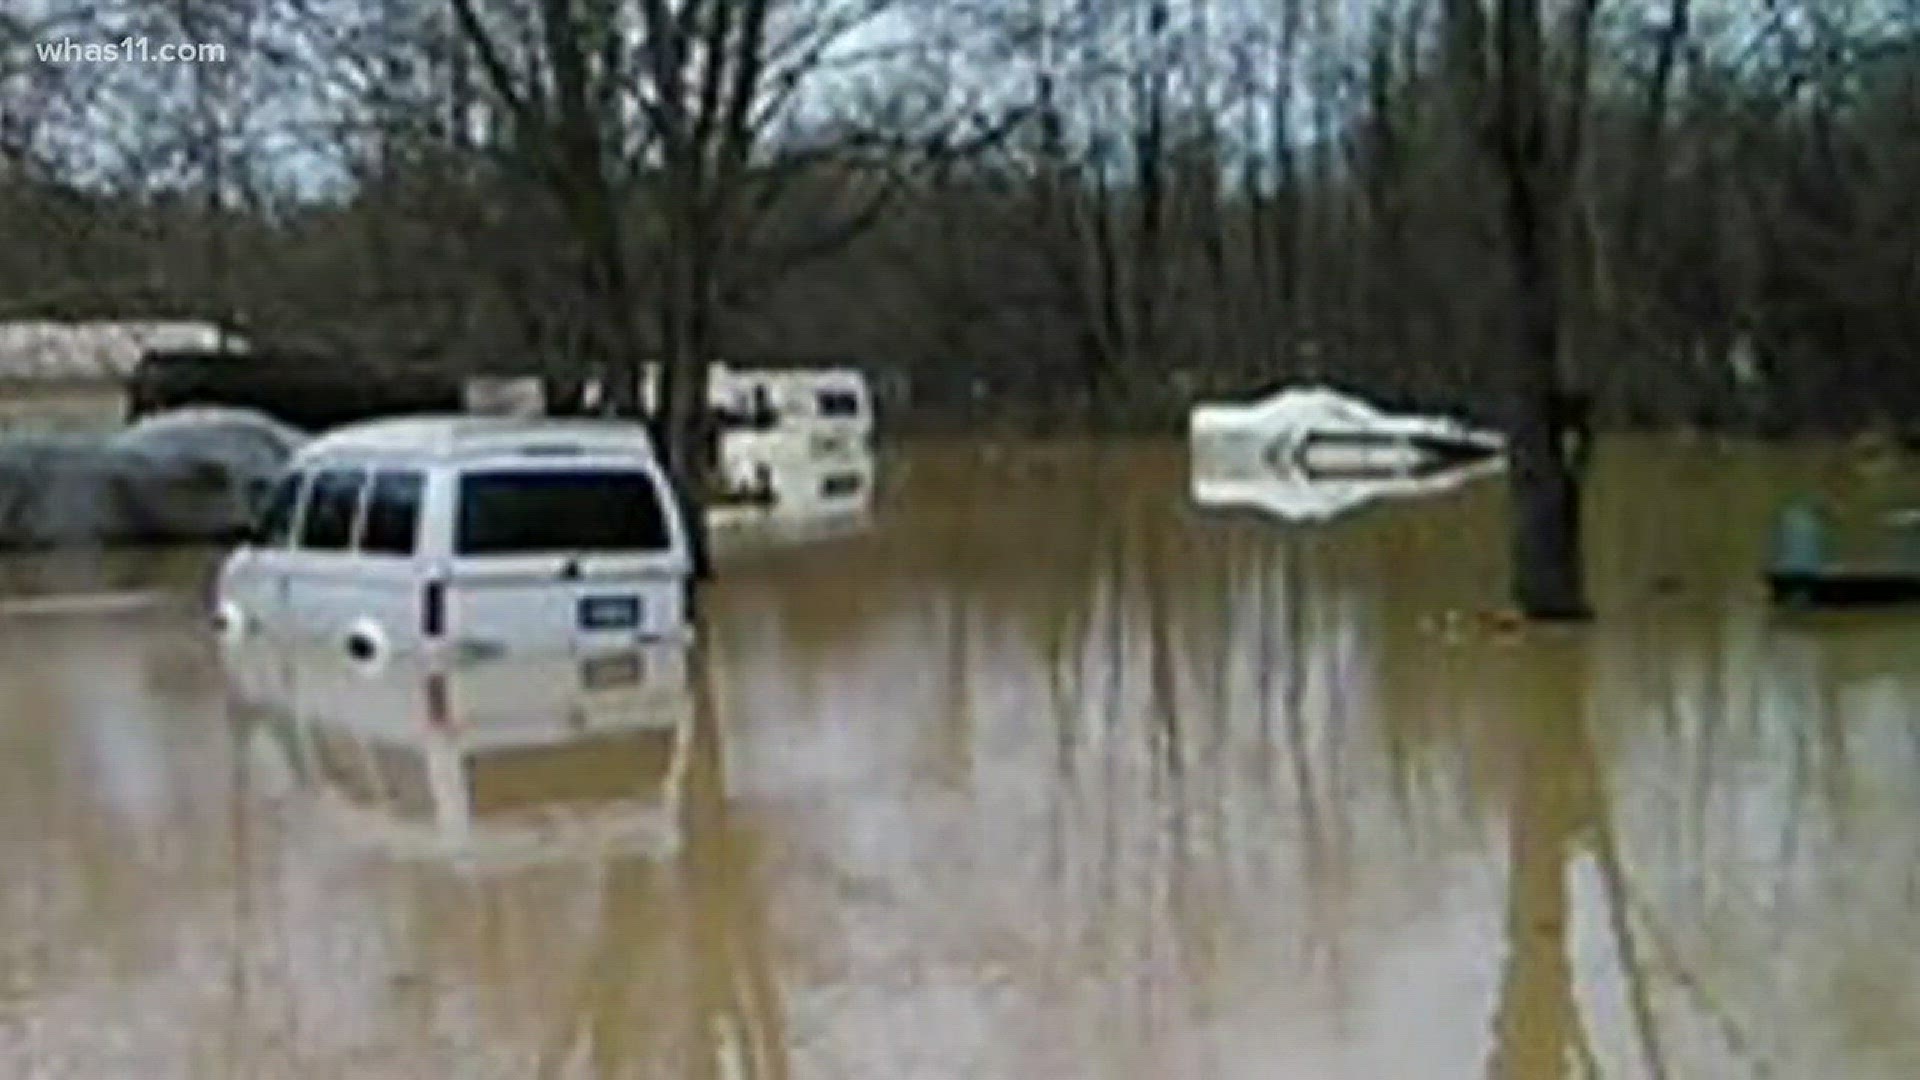 The flooding a for concern for many Kentuckiana communities, including those that may not have the resources to cover the costs of clean-up. The judge-executive in Carroll County issued an emergency disaster declaration with the hope of getting financial